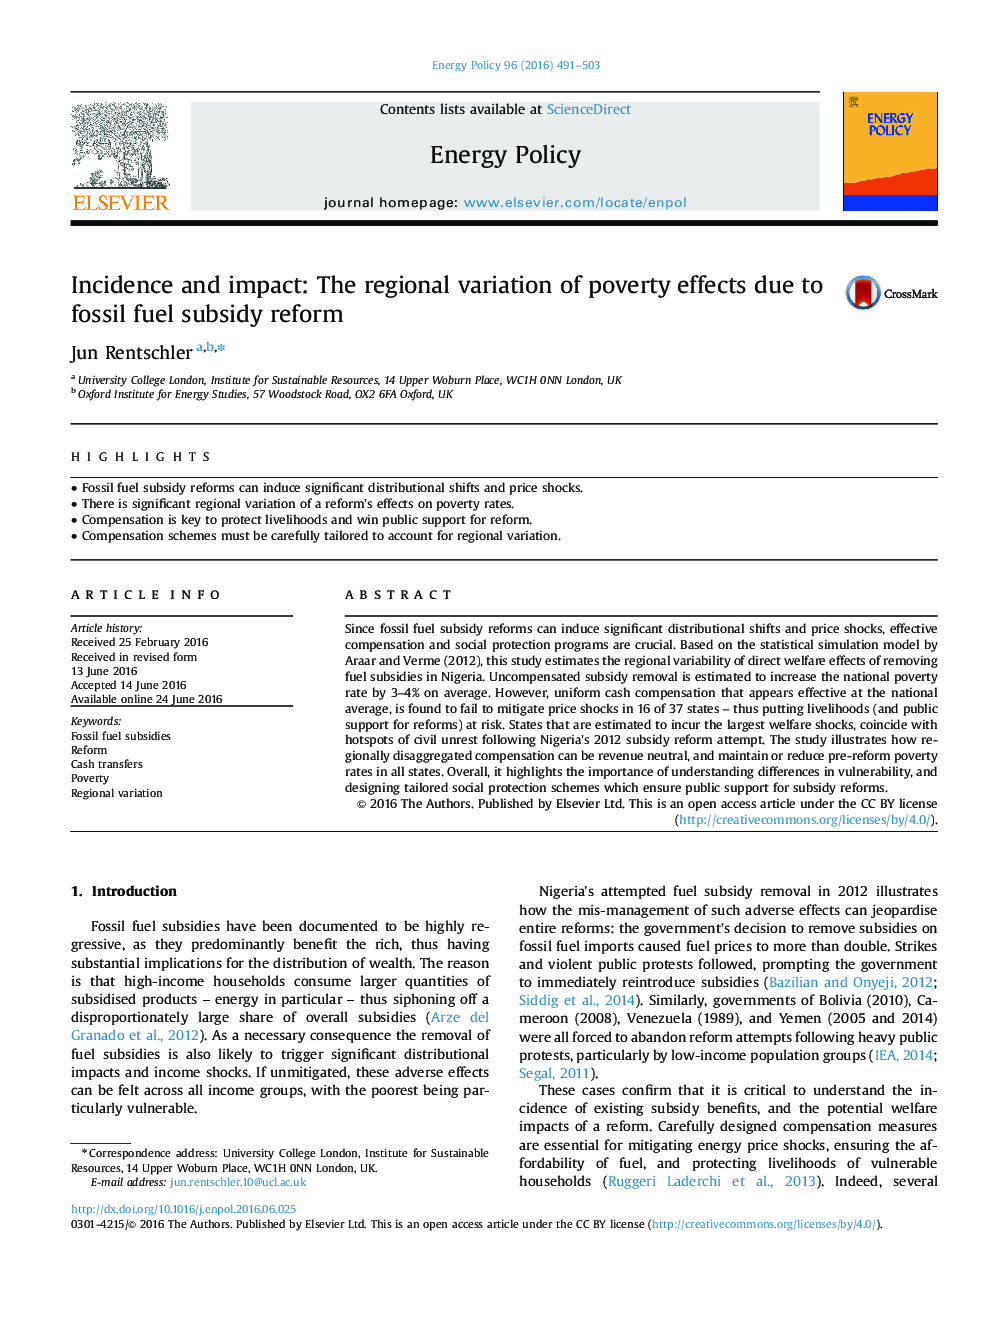 Incidence and impact: The regional variation of poverty effects due to fossil fuel subsidy reform